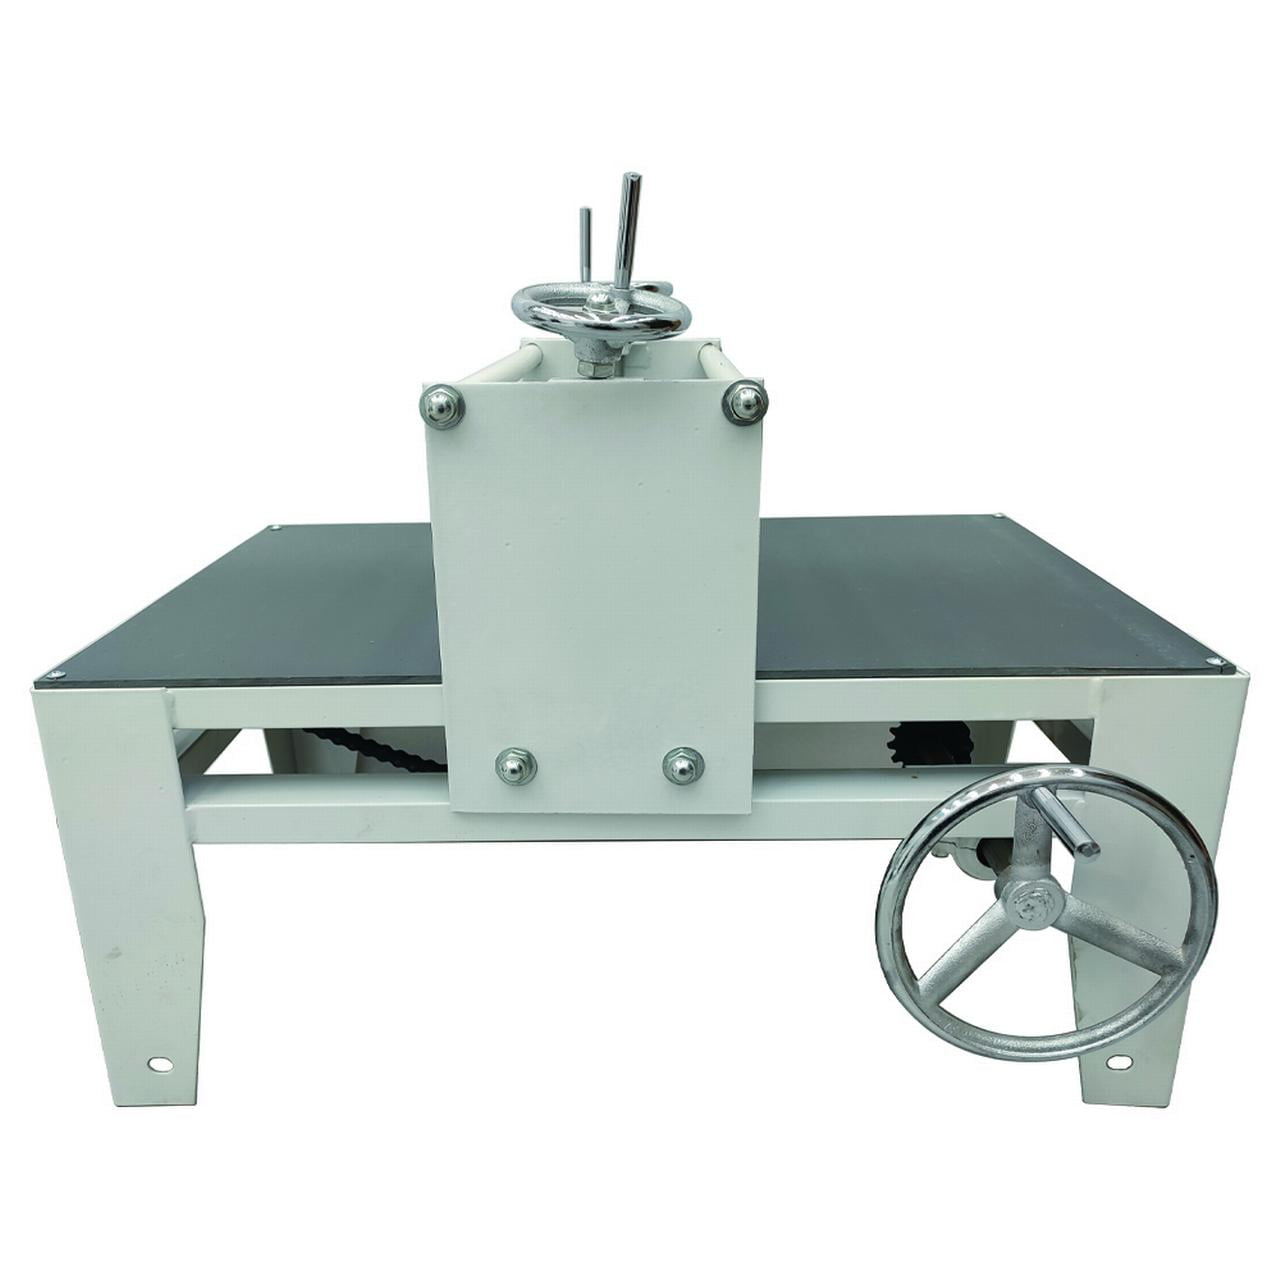 Techtongda Ceramic Clay Plate Machine Slab Roller for Clay& Heavy Duty  Hand-Cut Table Top Adjustable No Shims 